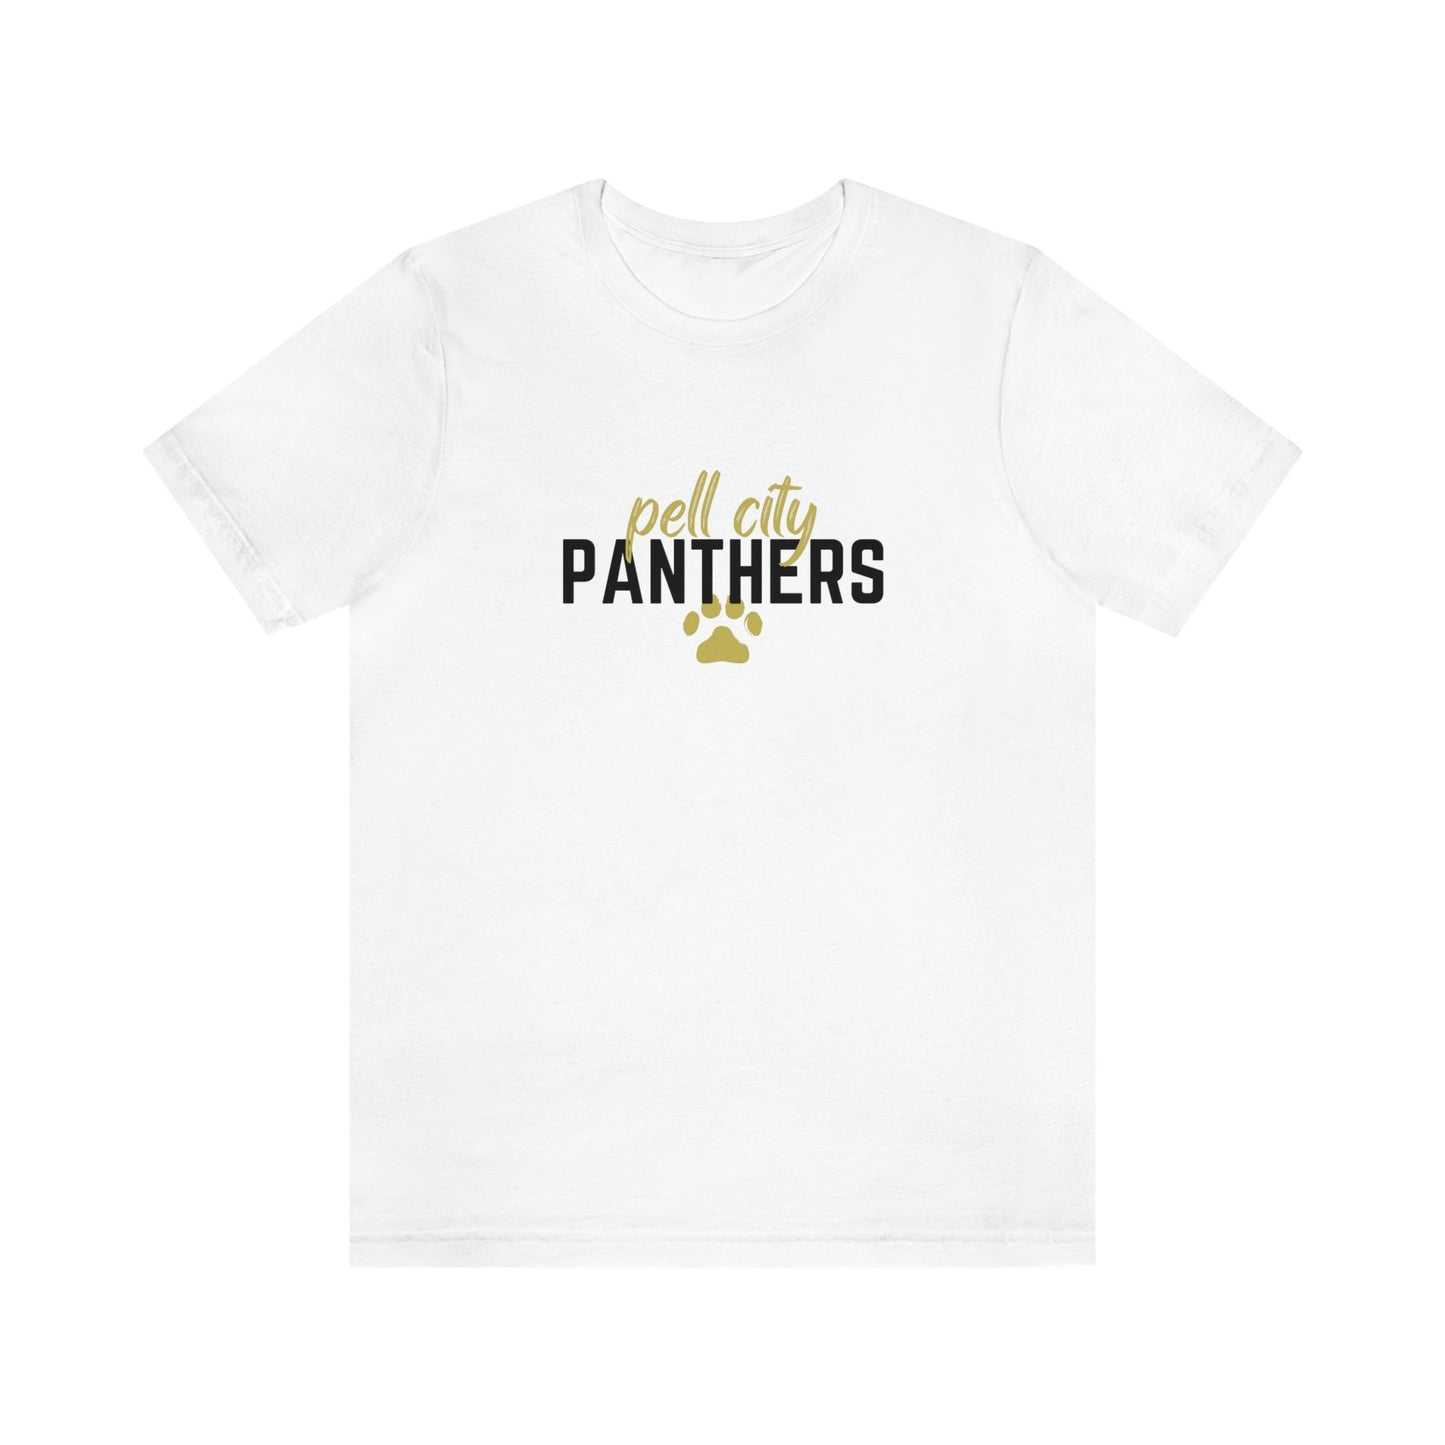 Pell City Panthers (White)